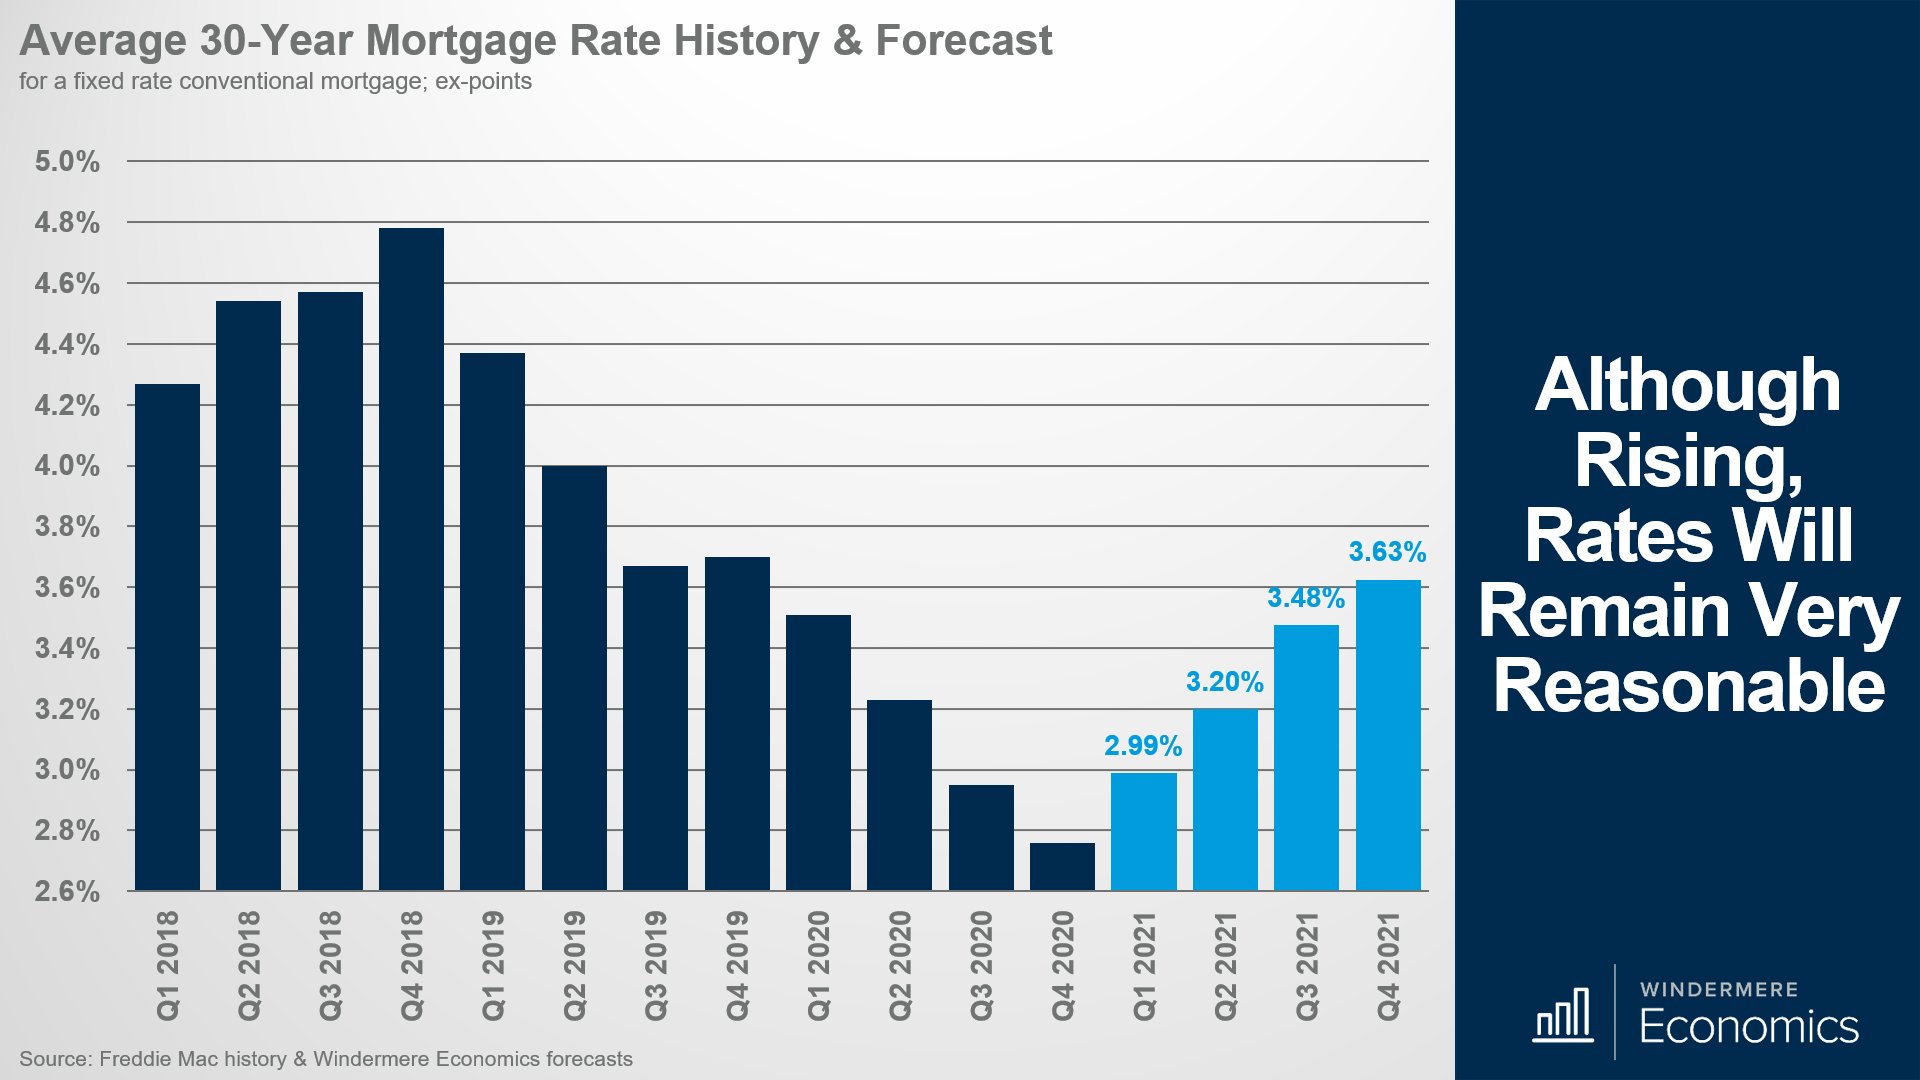 What to expect with rising mortgage rates